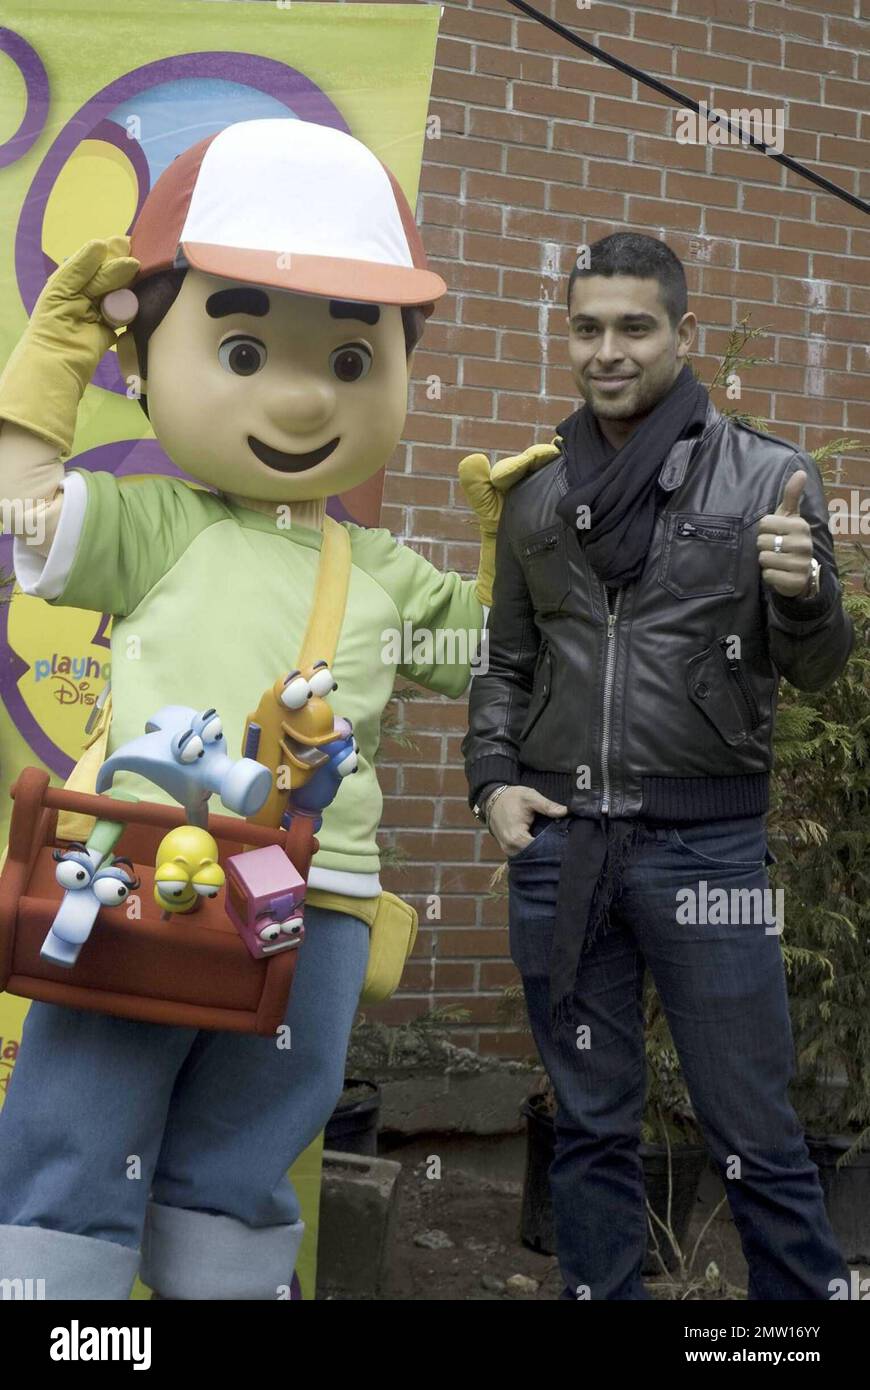 Actor Wilmer Valderrama, star of the Disney Channel's hit multicultural preschool series "Handy Manny," joins the Handy Manny character and kids from New York City's Earth School to plant a tree for Earth Day in the Generation X Garden on Manhattan's Lower East Side. In the hit series, Valderrama provides the voice for handyman Manny Garcia, a helpful, determined young man who, with the assistance of his eclectic set of talking tools, is the town's expert when it comes to repairing all that's not working, even friendships among neighbors. New York, NY. 4/15/09.    .  . Stock Photo